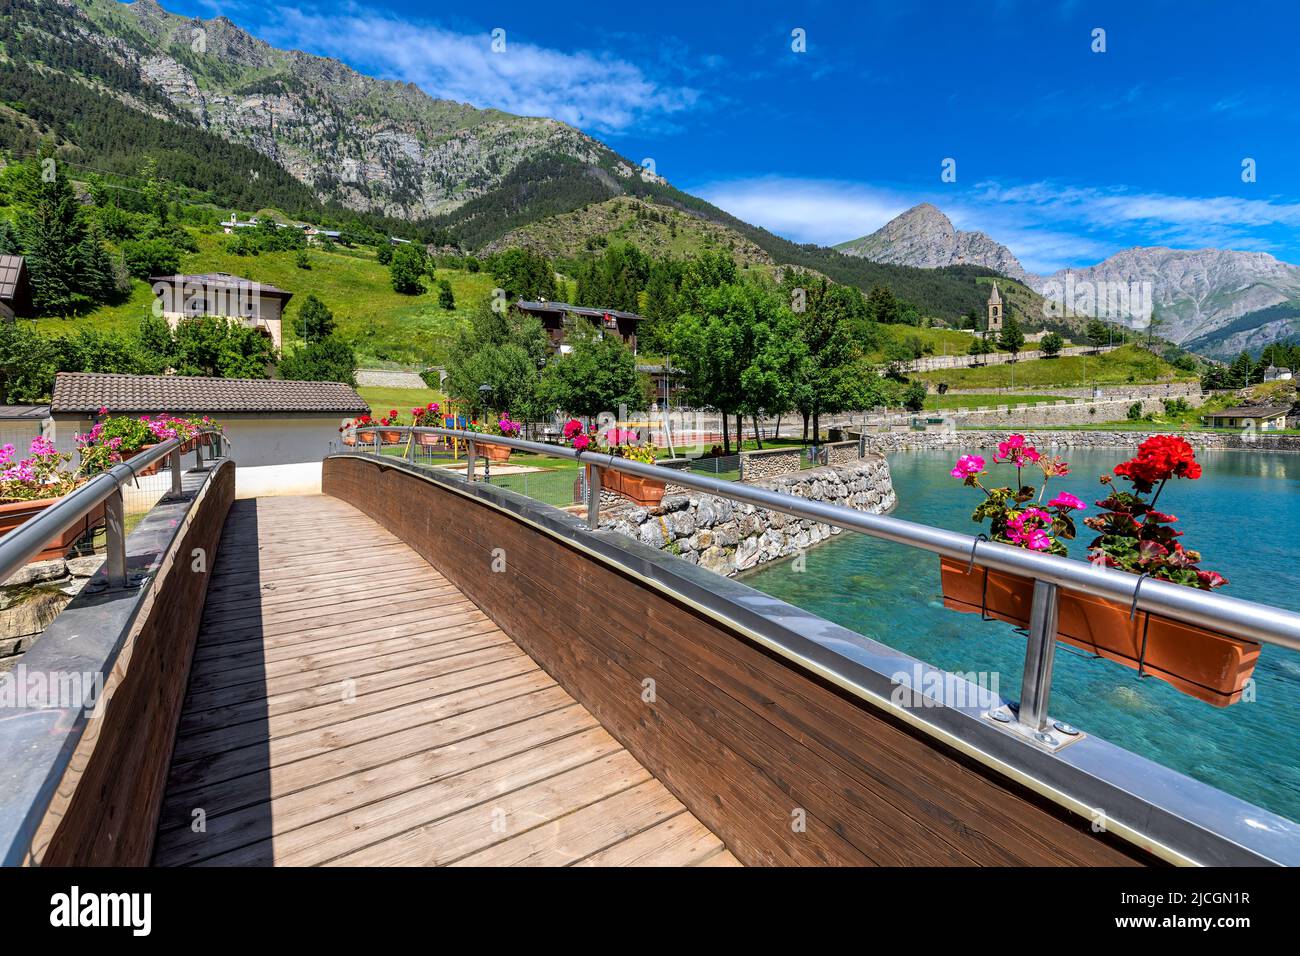 Narrow wooden bridge over small artificial lake as mountains under blue sky on background in town of Pietraporzio in Piedmont, Northern Italy. Stock Photo